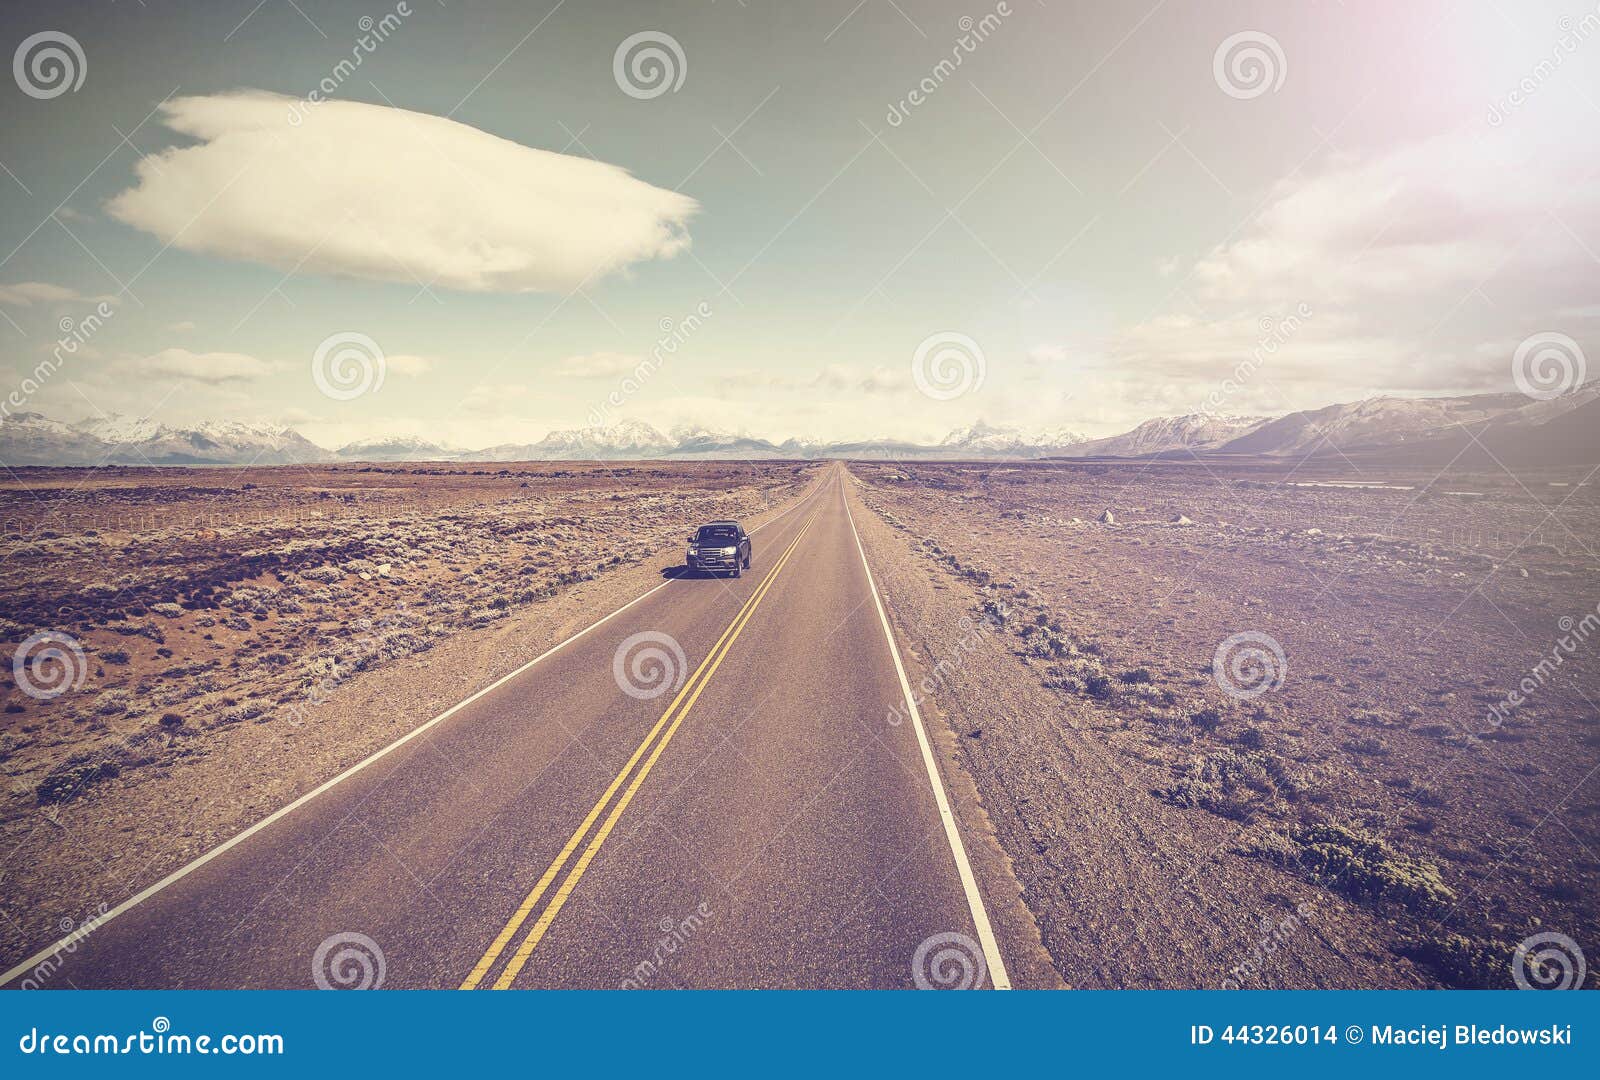 vintage picture of car on endless country highway, ruta 40.